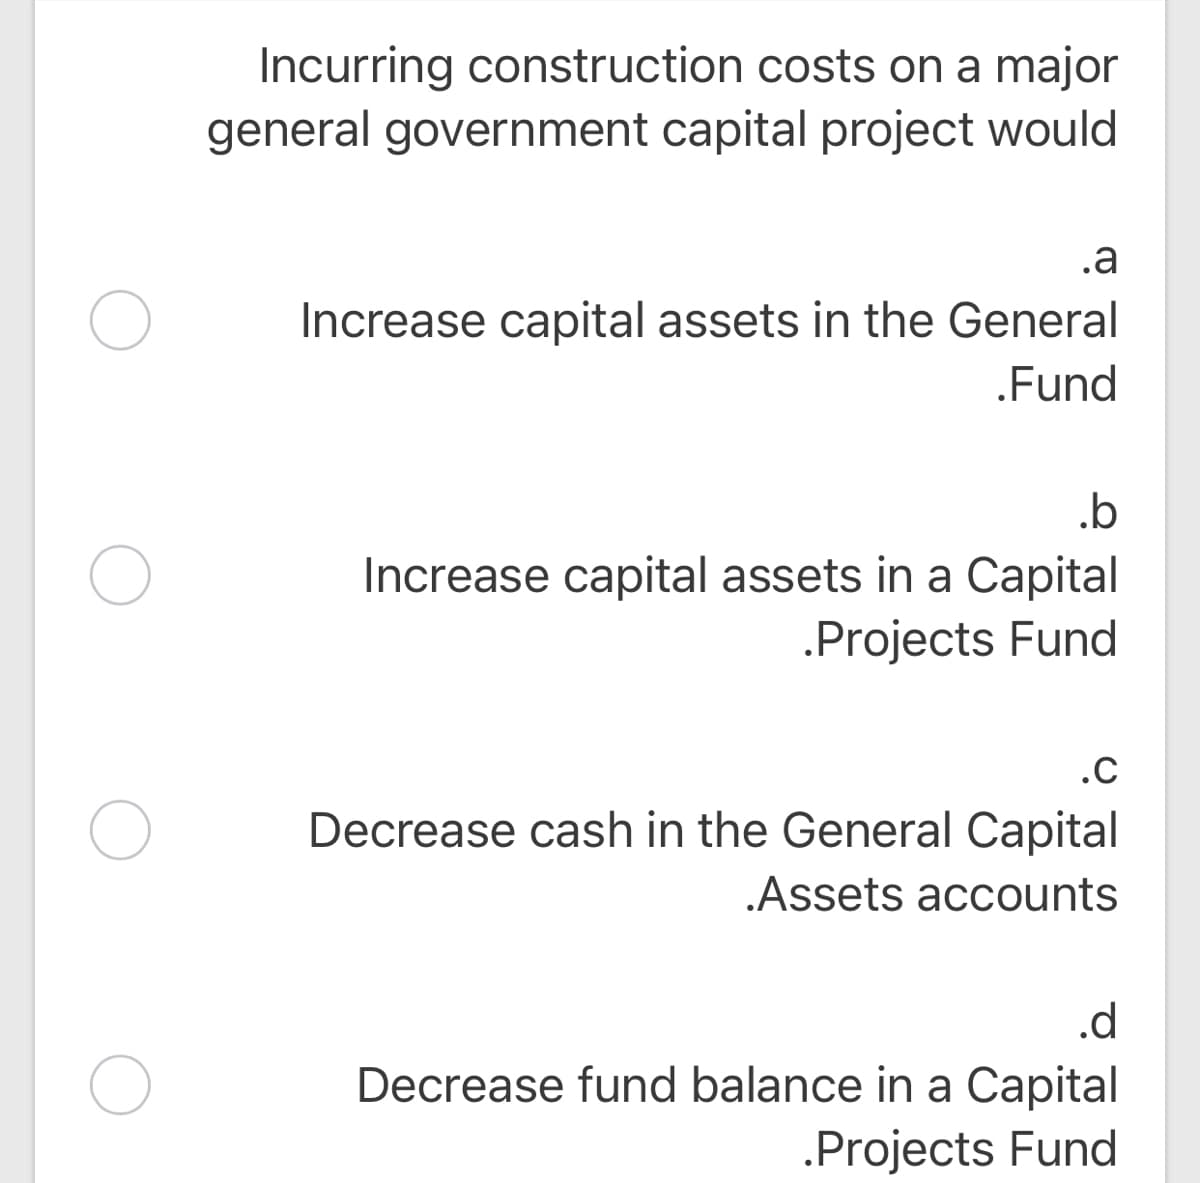 Incurring construction costs on a major
general government capital project would
.a
Increase capital assets in the General
.Fund
.b
Increase capital assets in a Capital
.Projects Fund
.C
Decrease cash in the General Capital
.Assets accounts
.d
Decrease fund balance in a Capital
.Projects Fund
